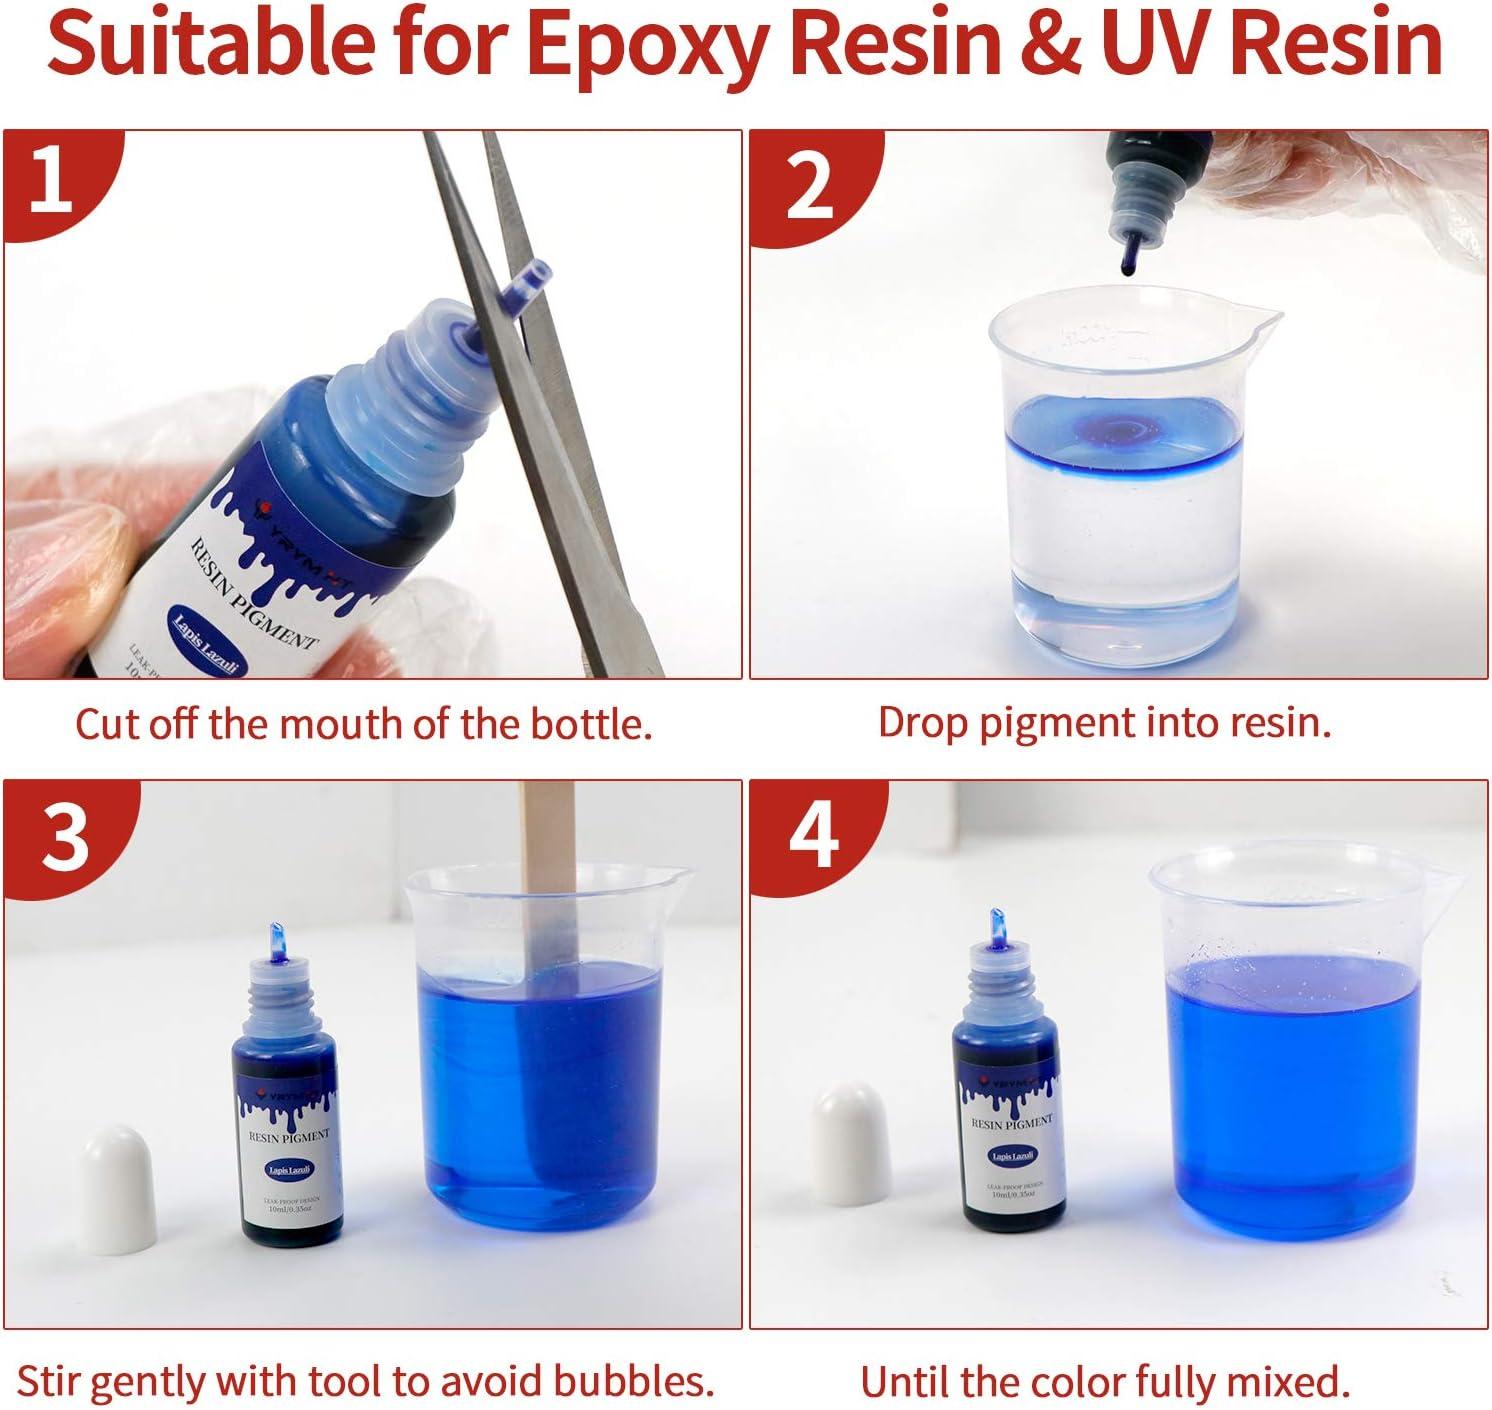 Epoxy Resin Pigment - 18 Colors Epoxy UV Resin Dye Liquid Transparent for  UV Resin Coloring, DIY Resin Jewelry Making - Concentrated UV Resin  Colorant for Art, Paint, Crafts - 0.35 oz/10ml Each 